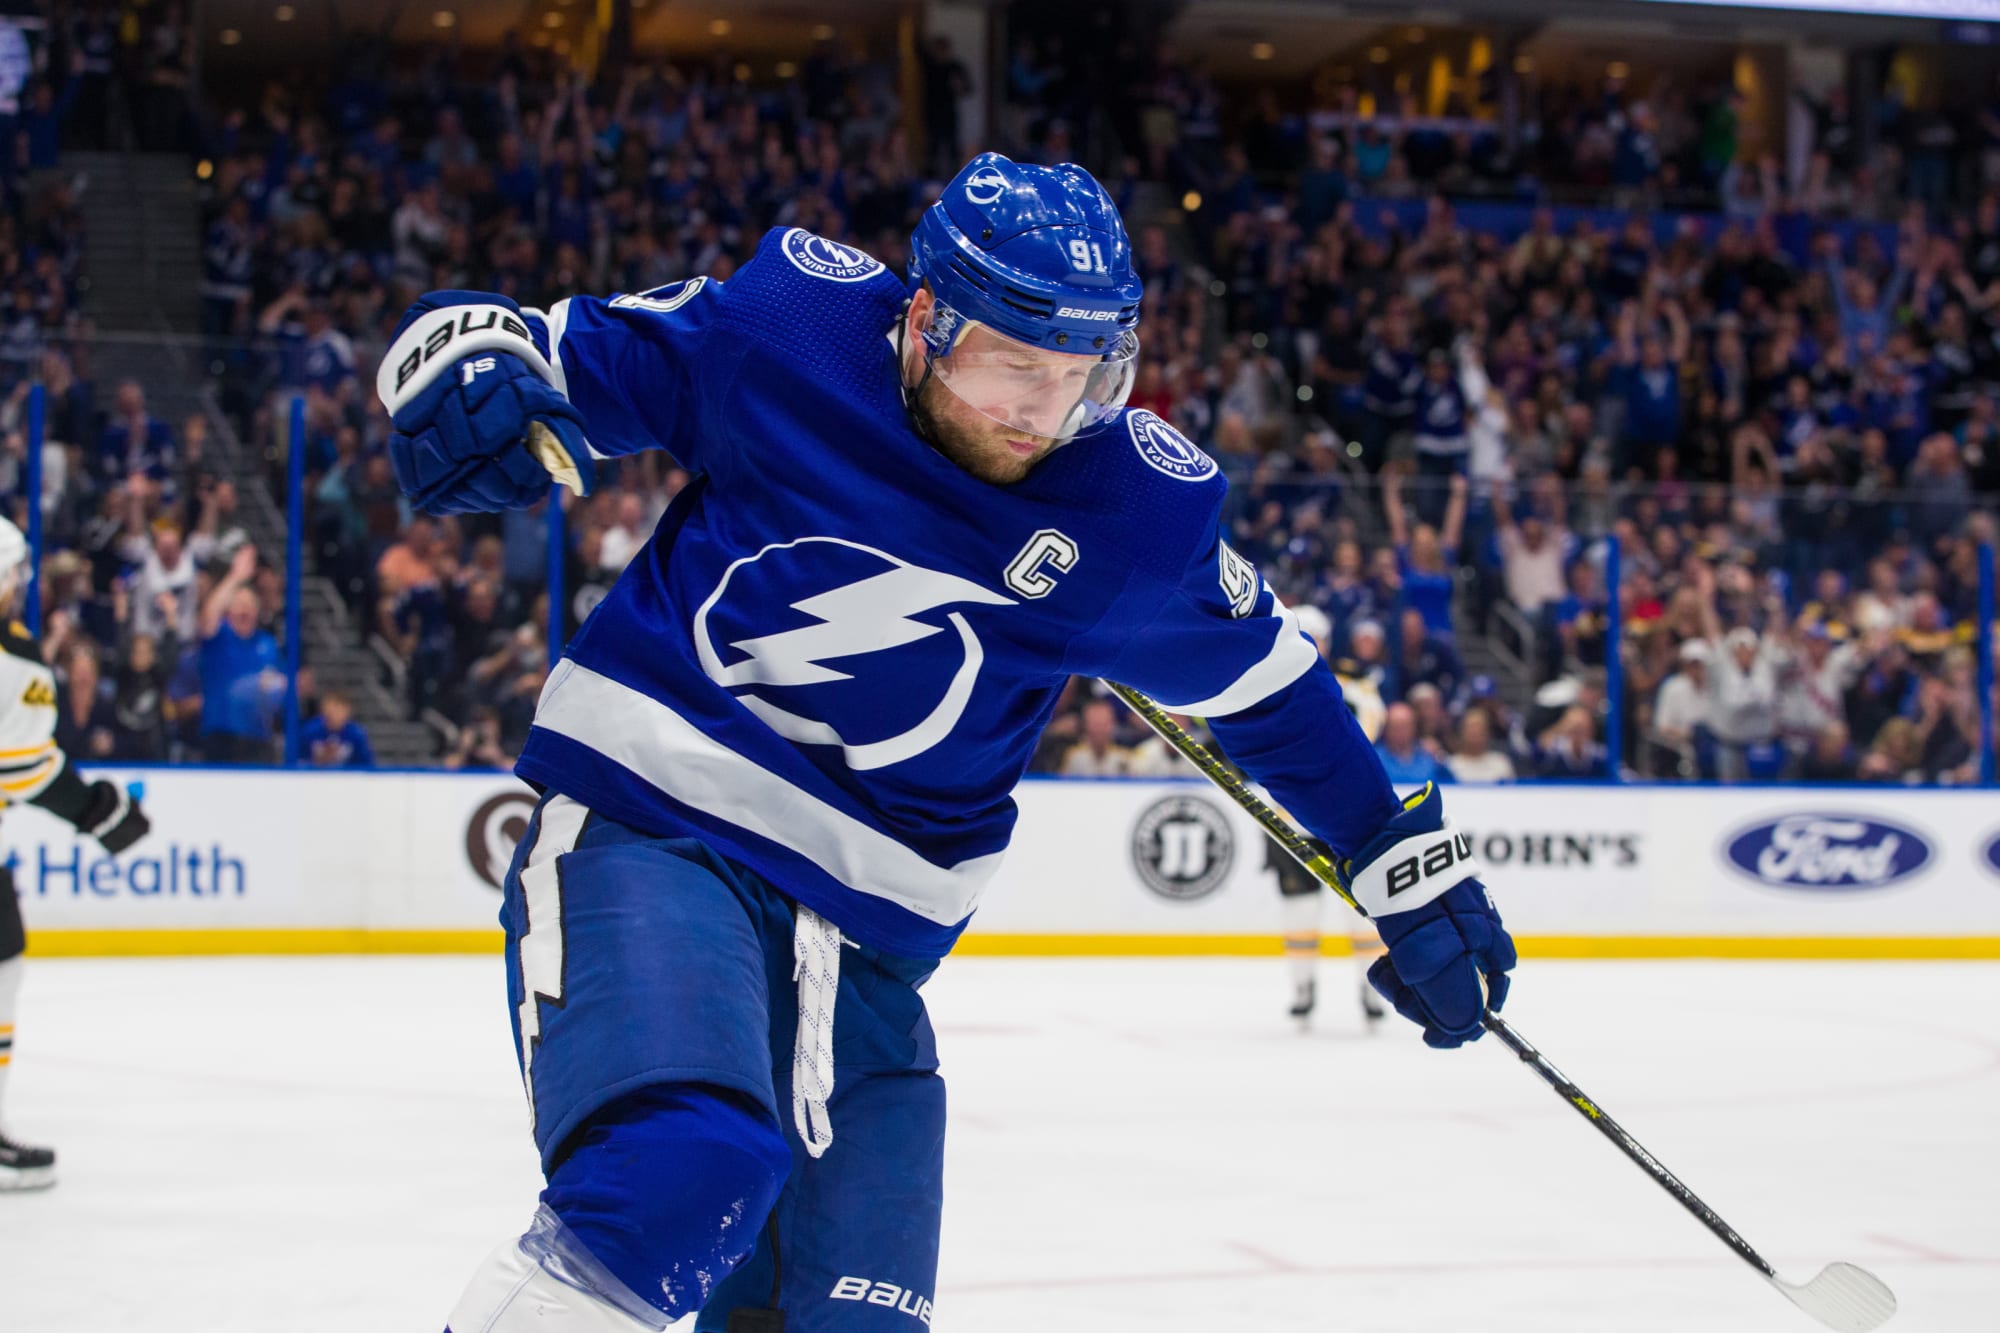 2019-20 NHL predictions: Standings, awards, and playoffs - Page 3